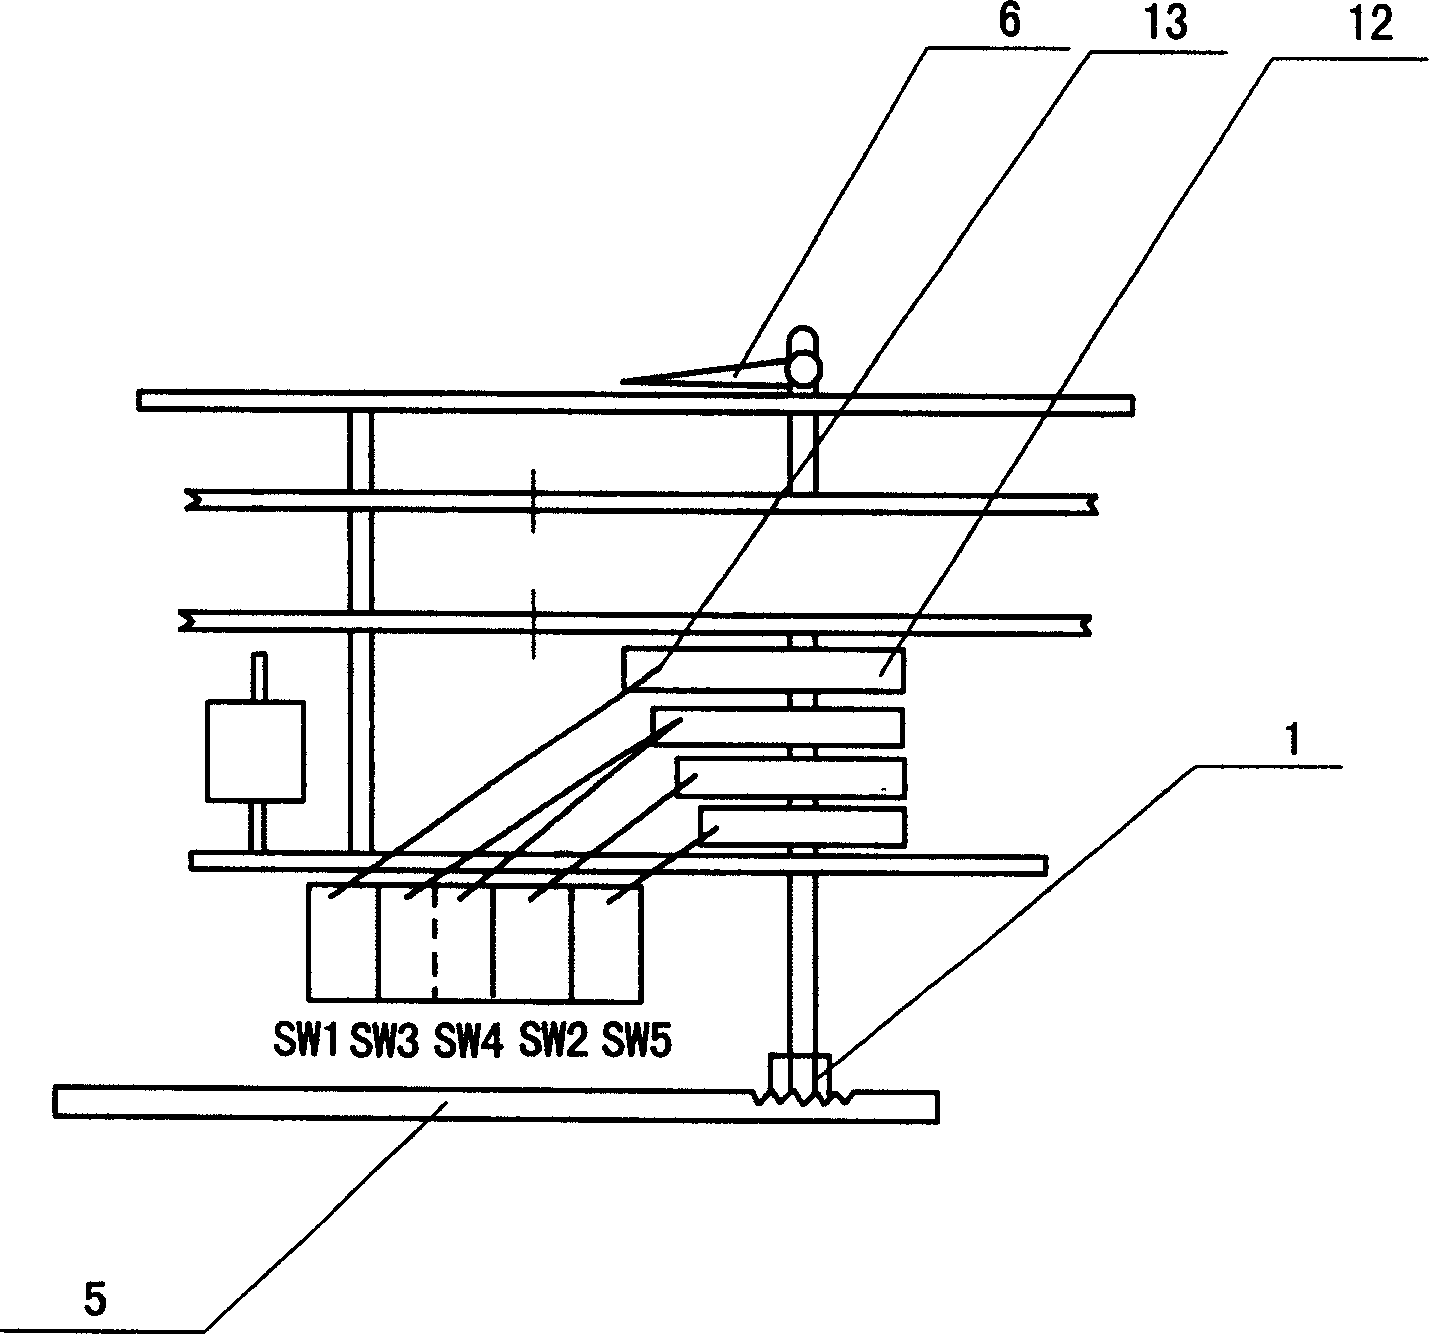 Dense machine torque measuring device and torque automatic control system